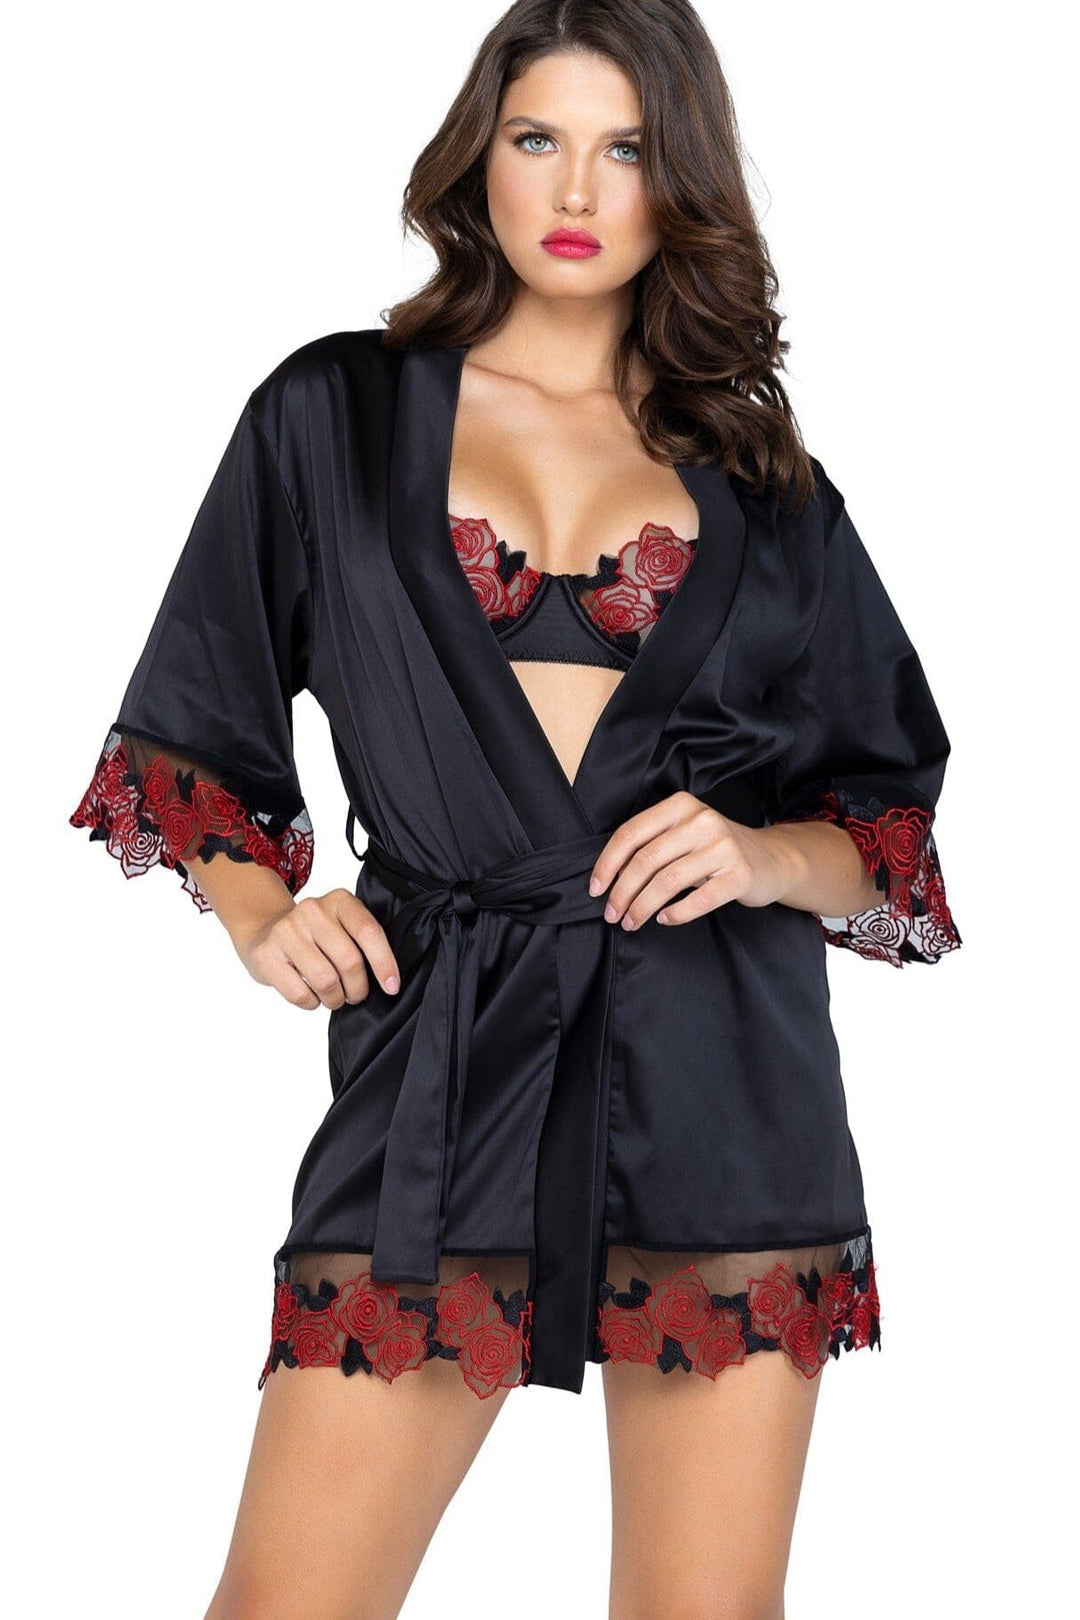 Rosa Bella Robe-Gowns + Robes-Roma Confidential-Black-L/XL-SEXYSHOES.COM